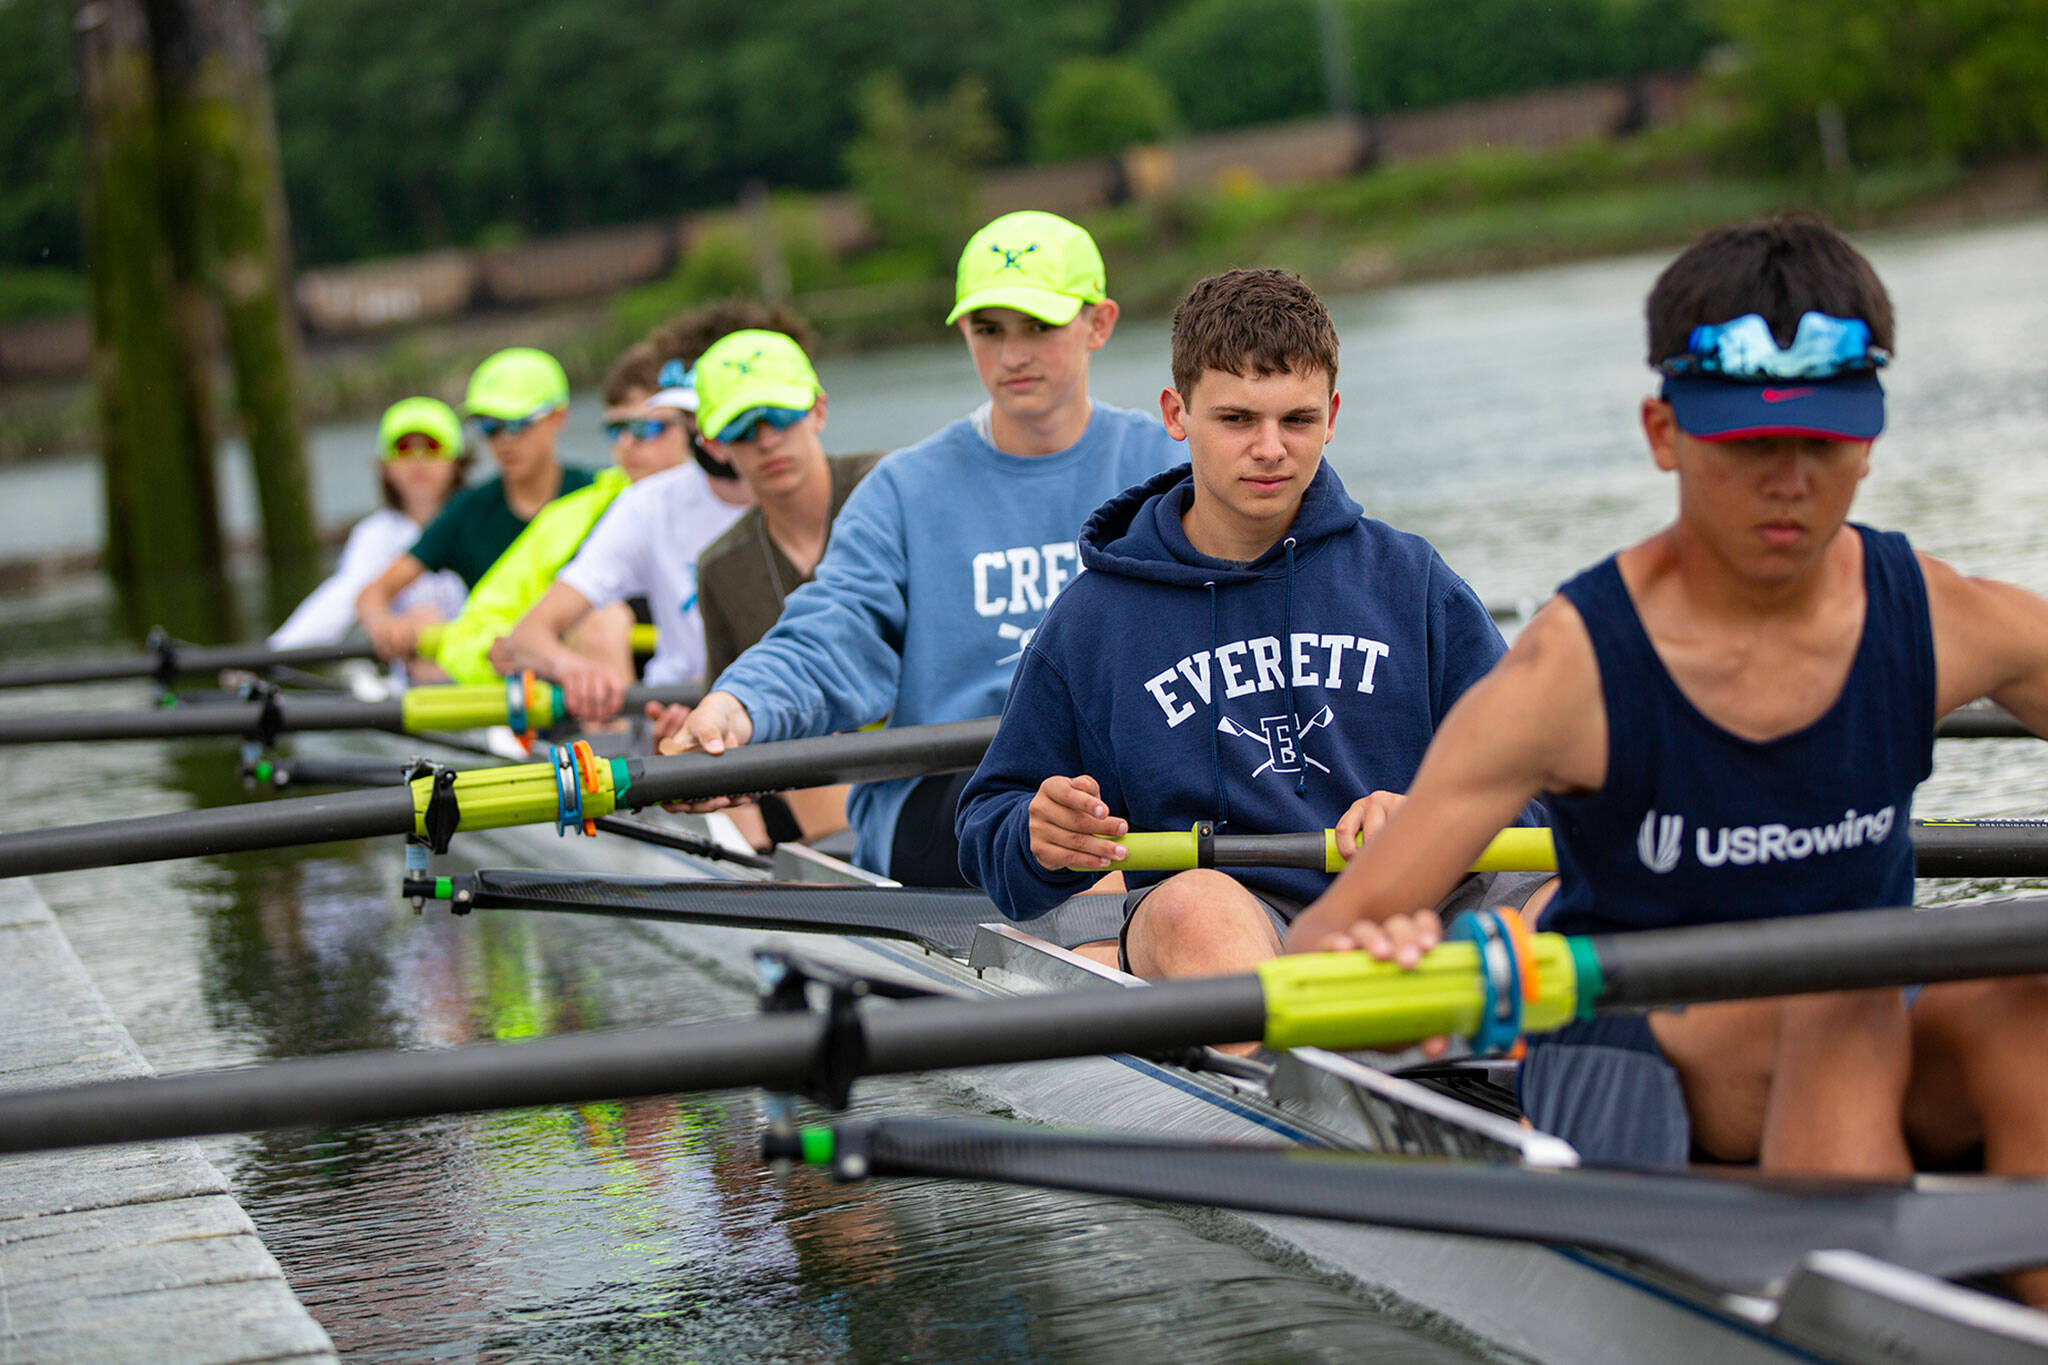 Members of Everett Rowing Association’s boys U16 8+ group push off from the dock before practice June 2 at Langus Riverfront Park in Everett. (Ryan Berry / The Herald)